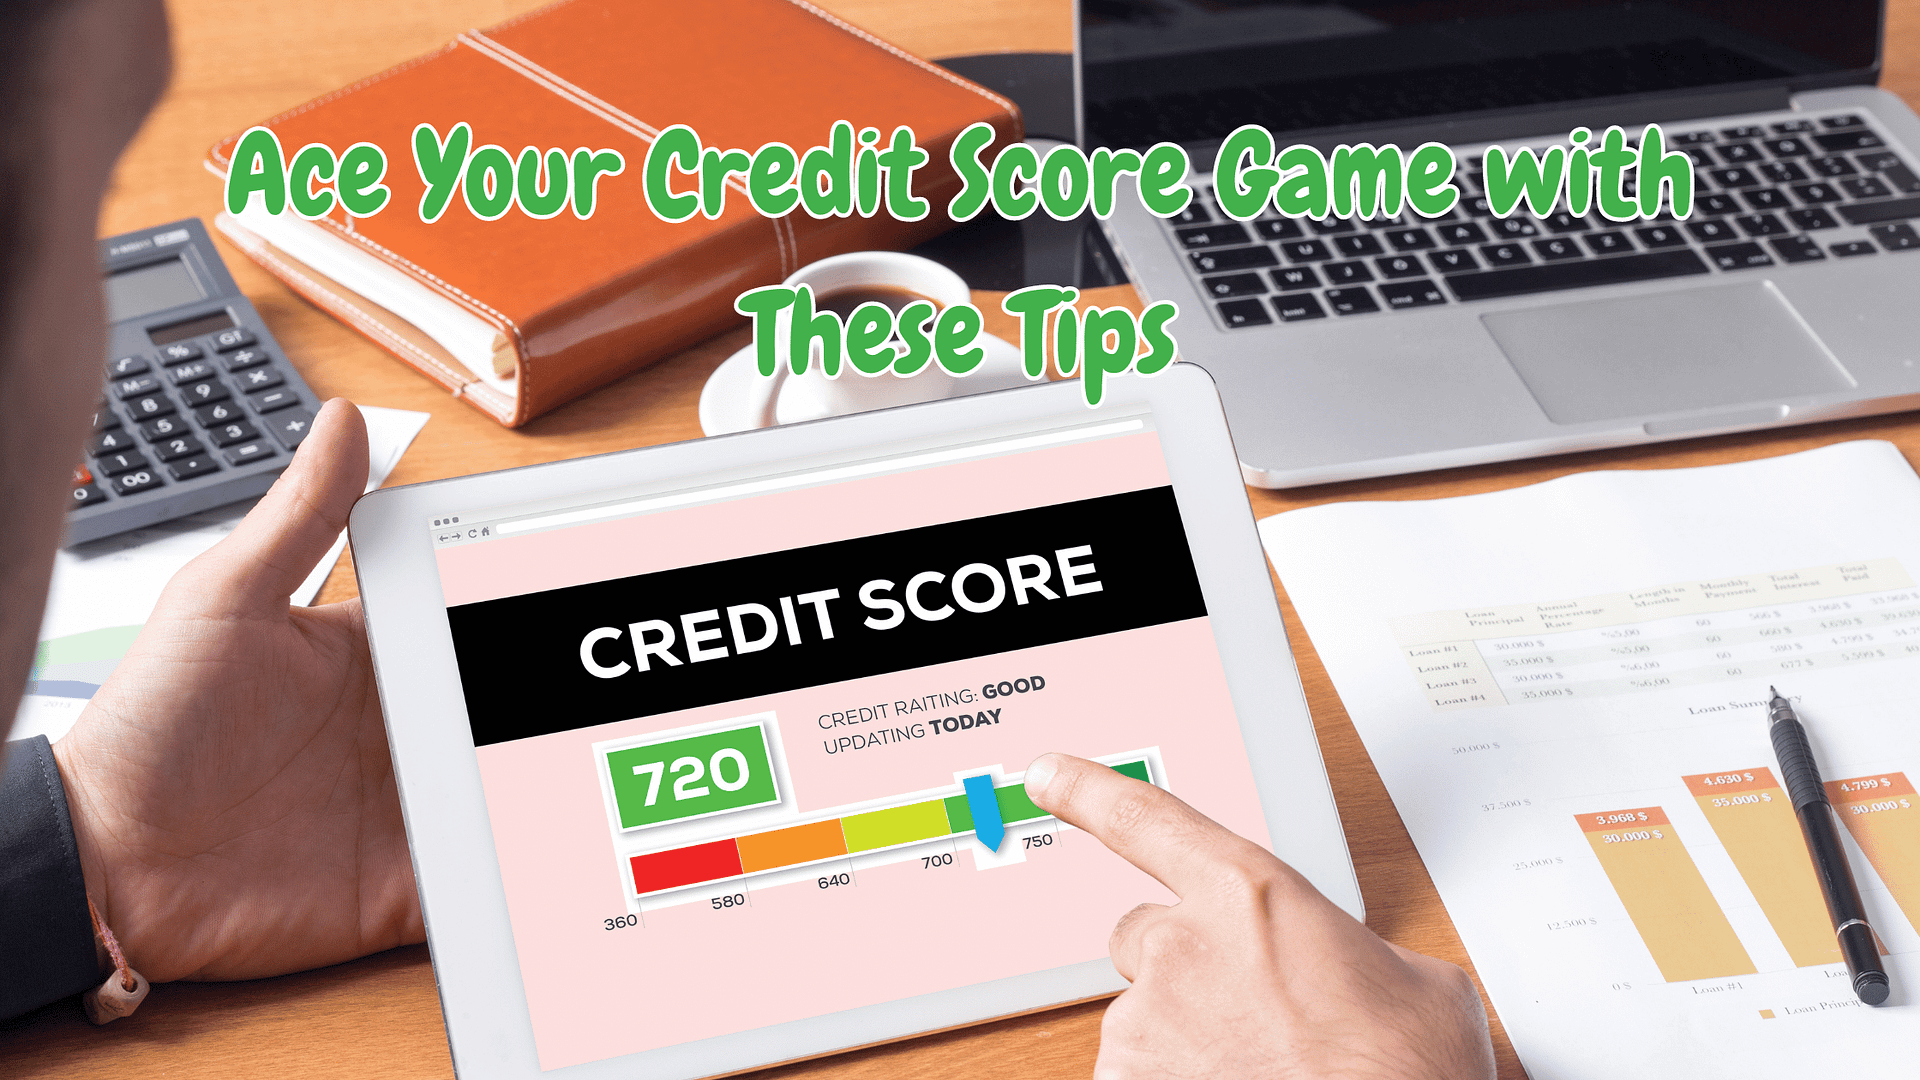 Ace Your Credit Score Game with These Tips